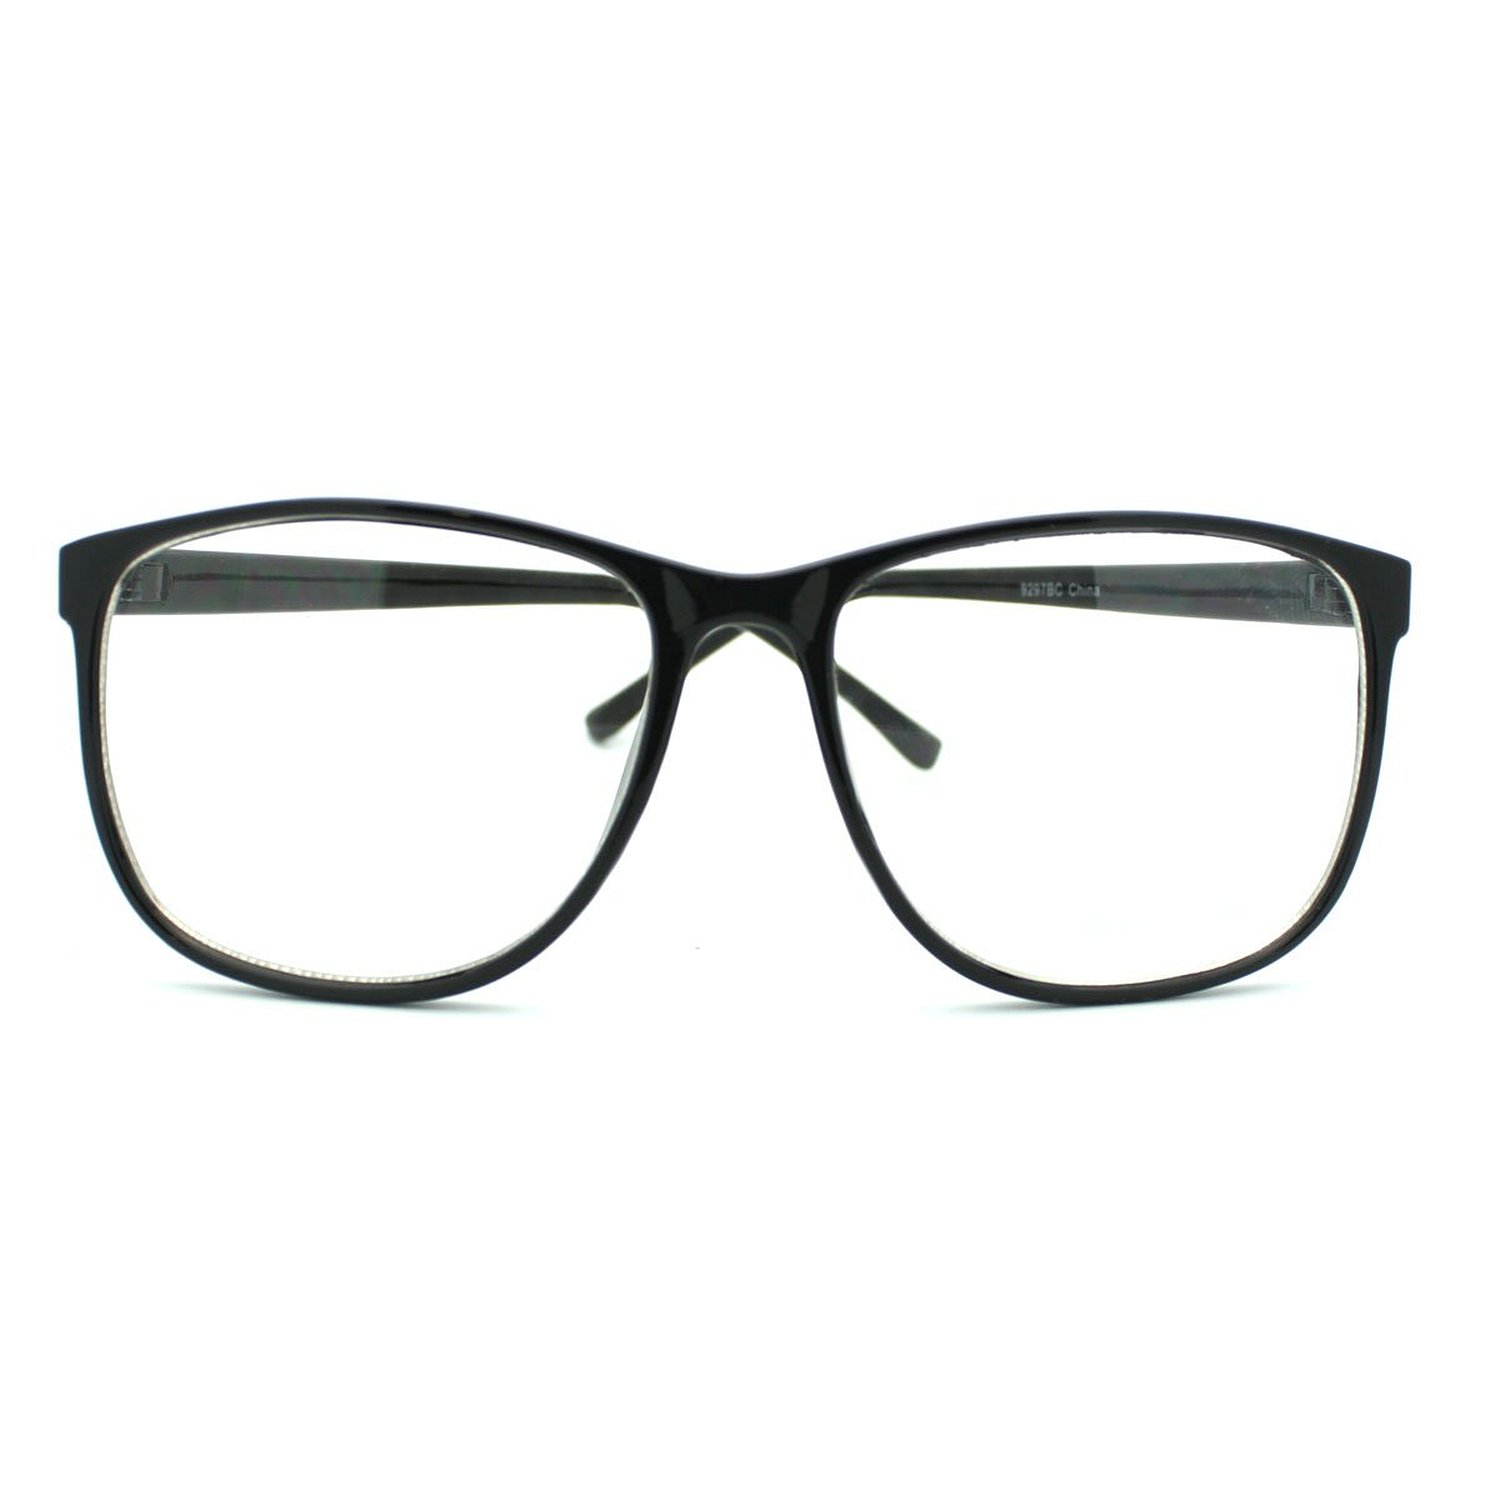 Black Large Nerdy Thin Plastic Frame with clear lenses